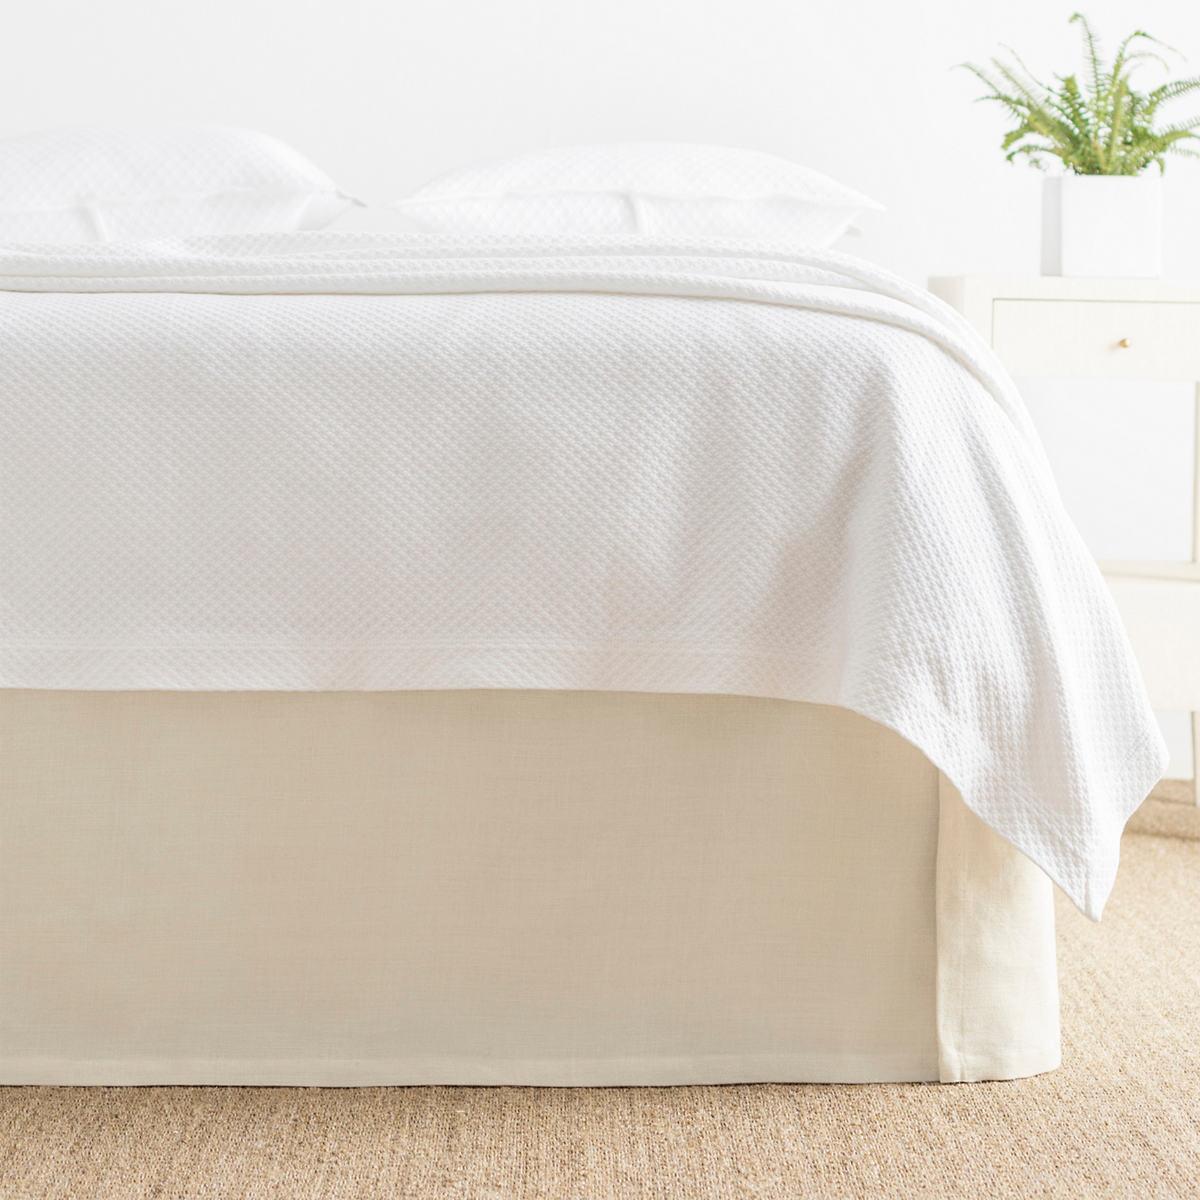 Cameo Linen Ivory Bed Skirt The, Ivory Bed Skirt Queen